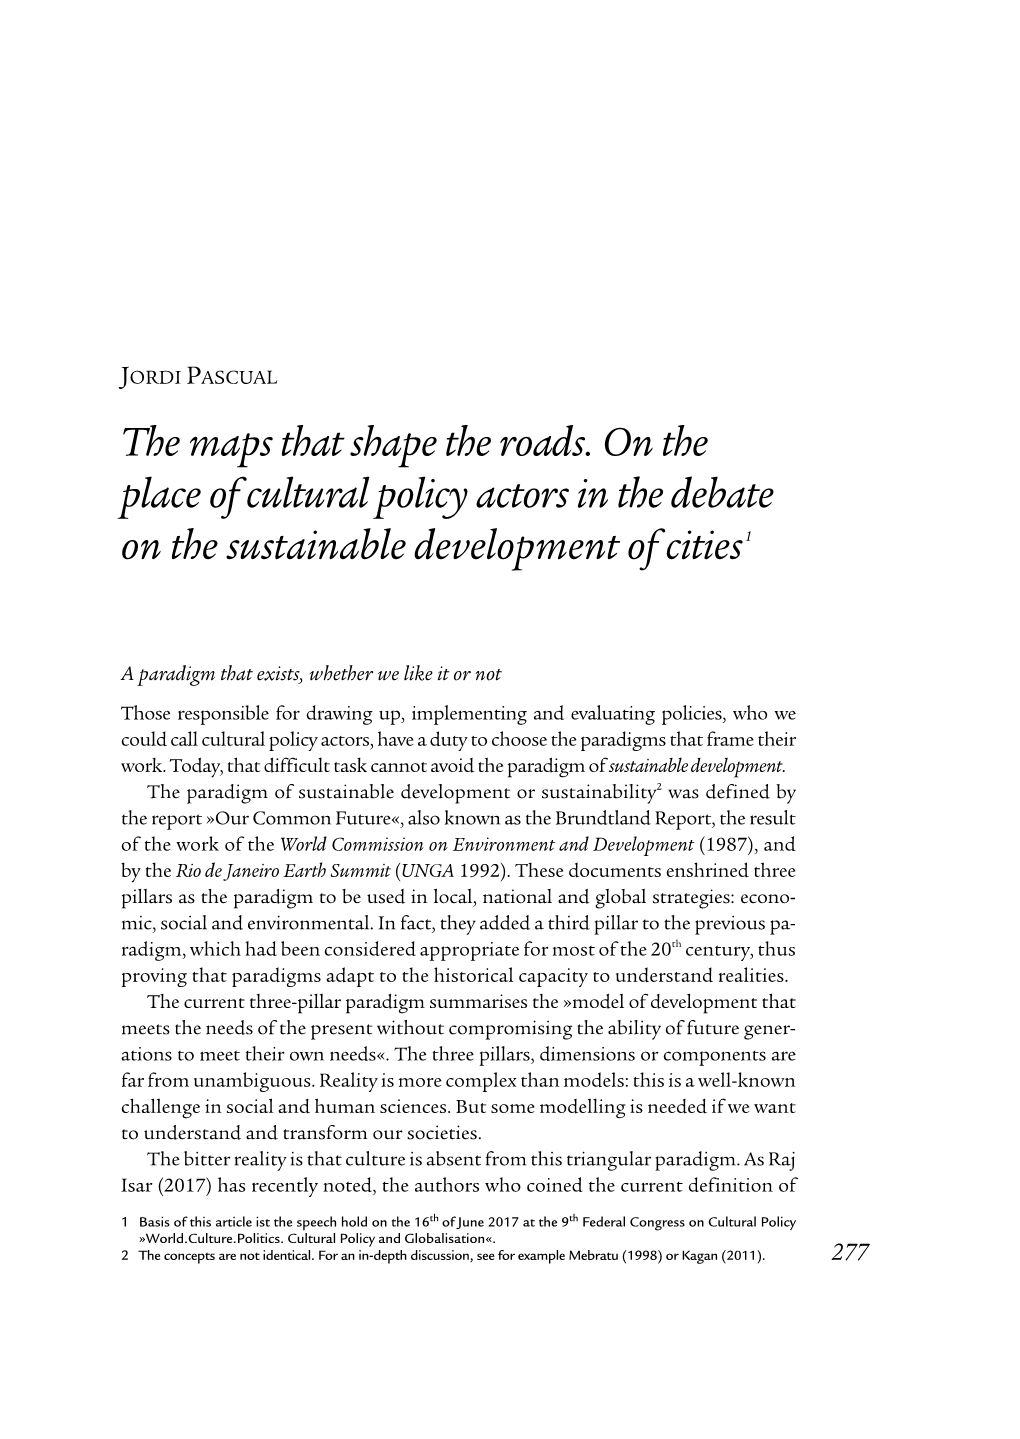 The Maps That Shape the Roads. on the Place of Cultural Policy Actors in the Debate on the Sustainable Development of Cities 1